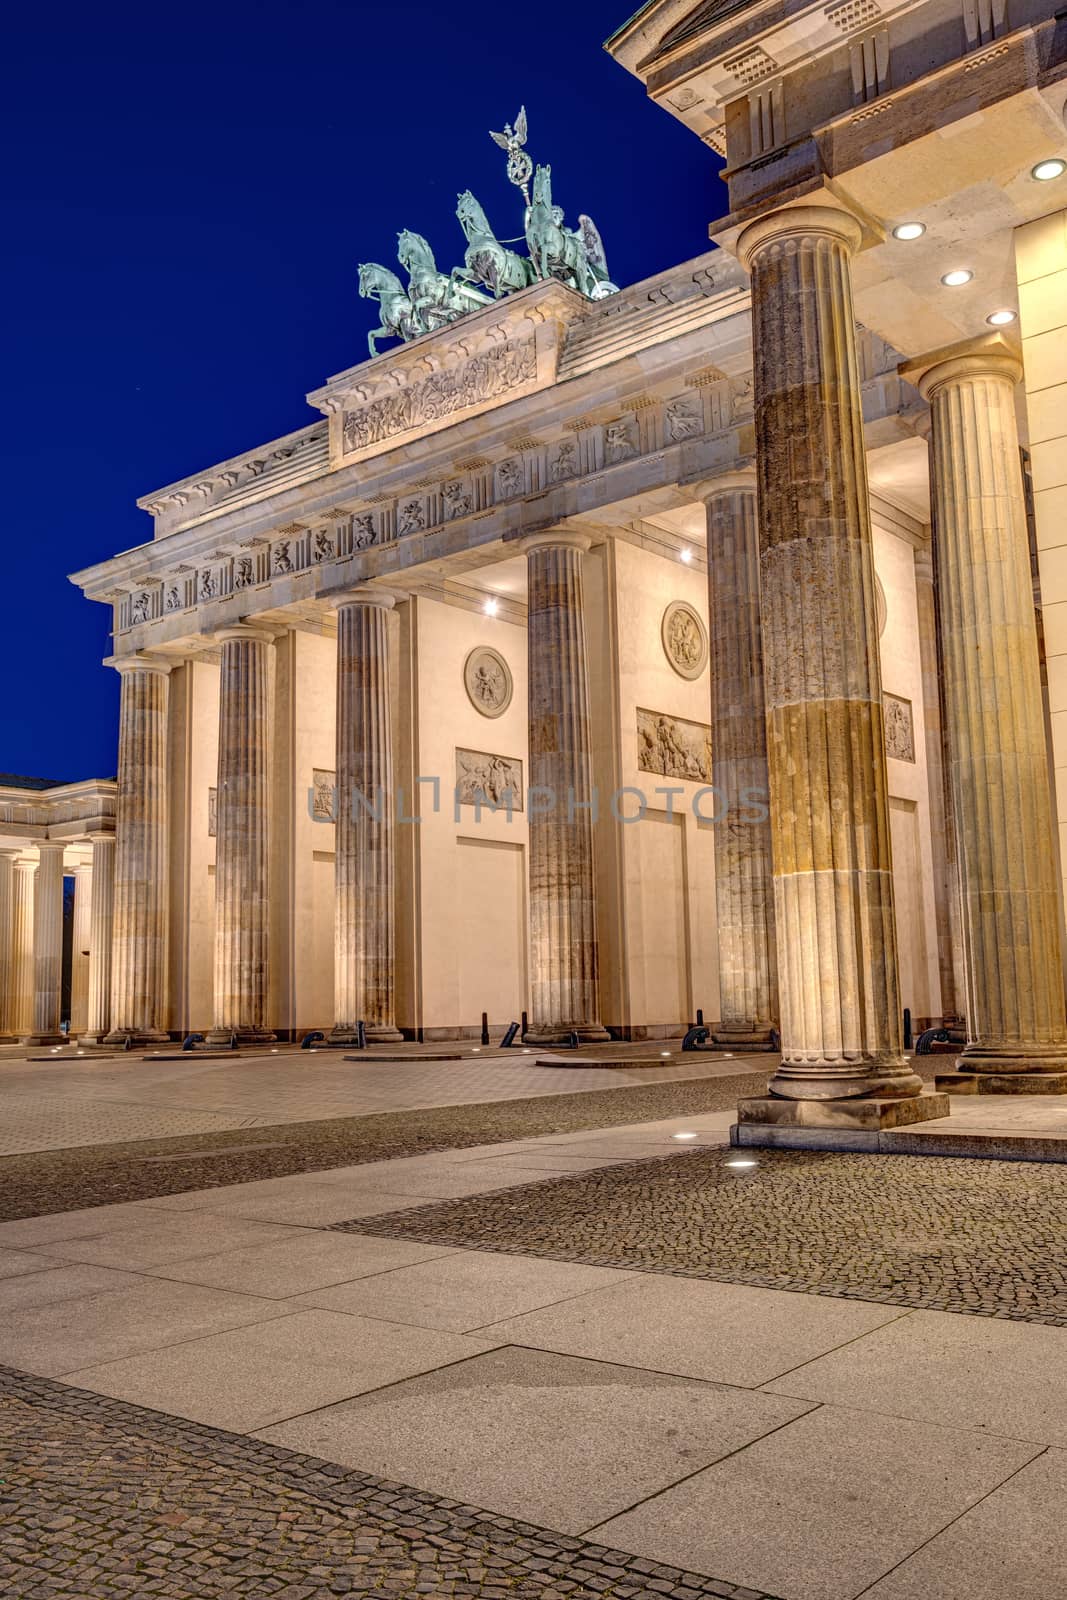 The famous Brandenburger Tor in Berlin at night